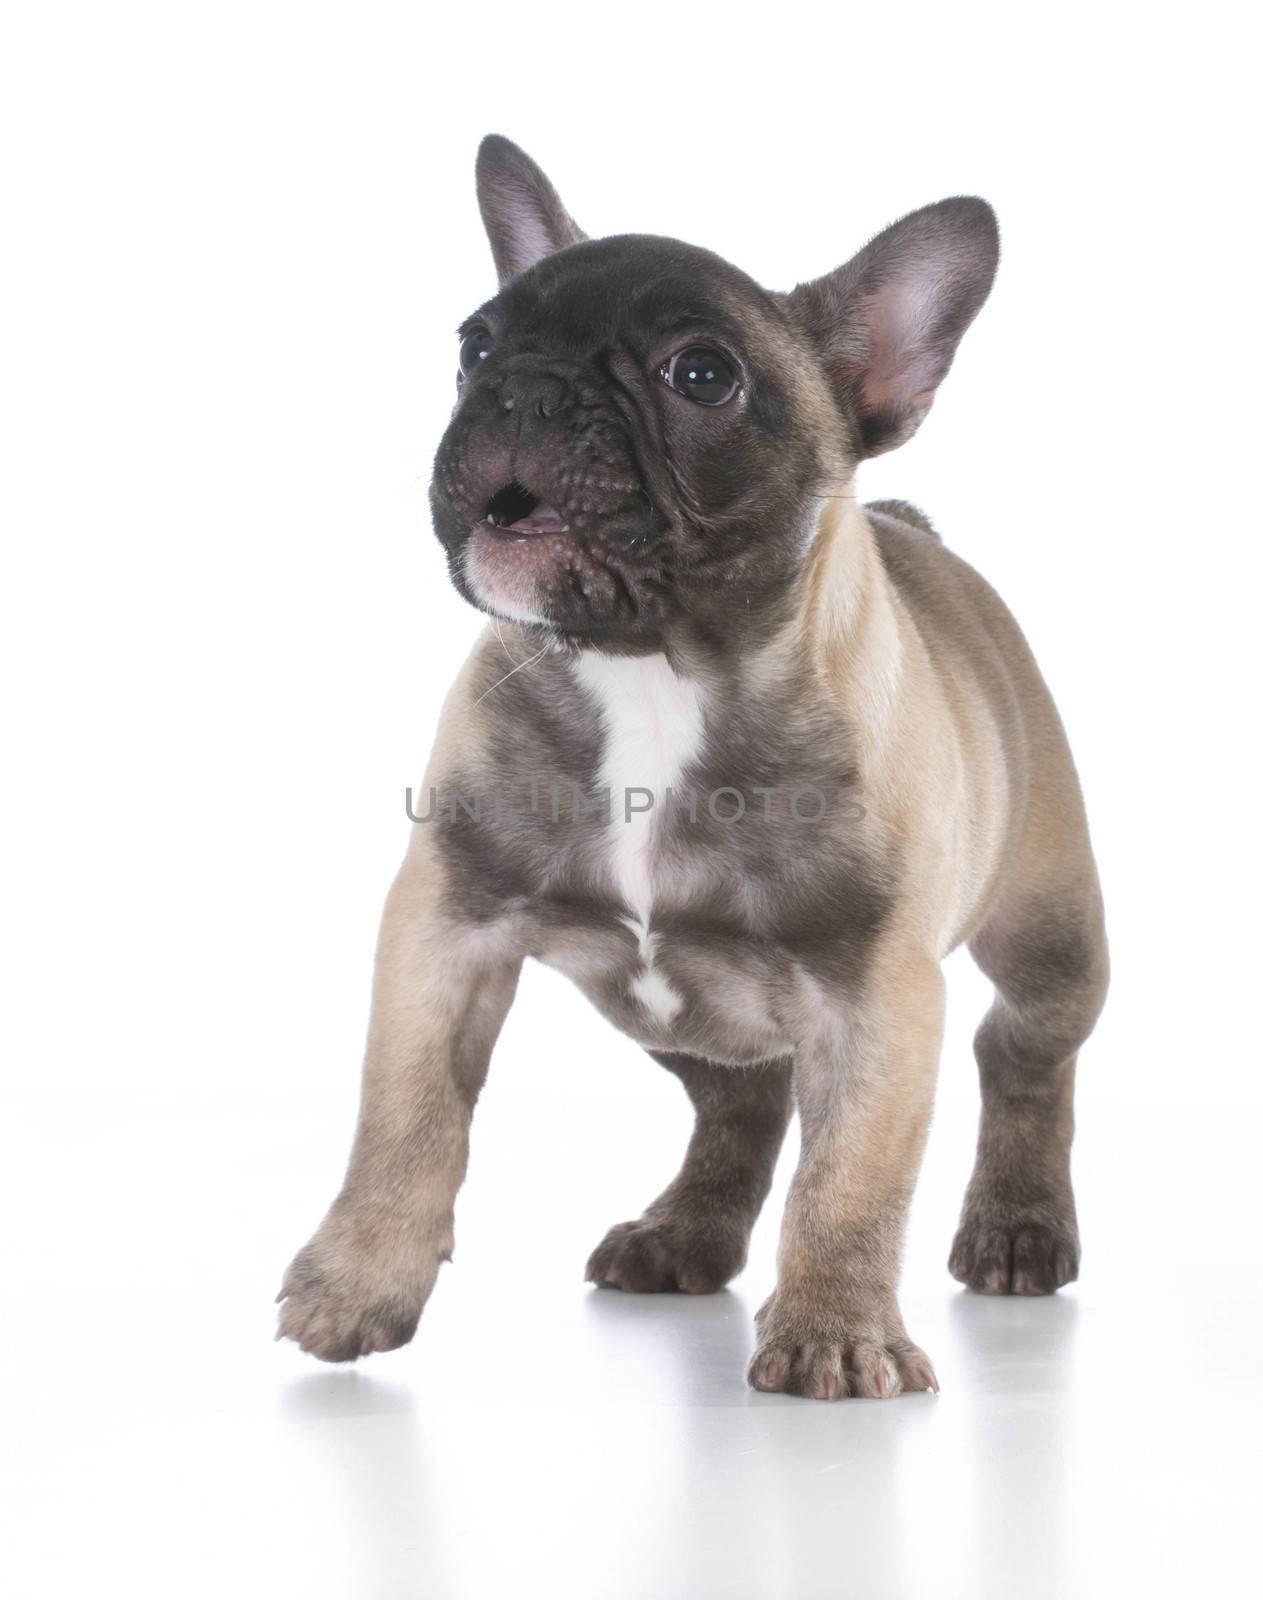 french bulldog with cute expression standing on white background